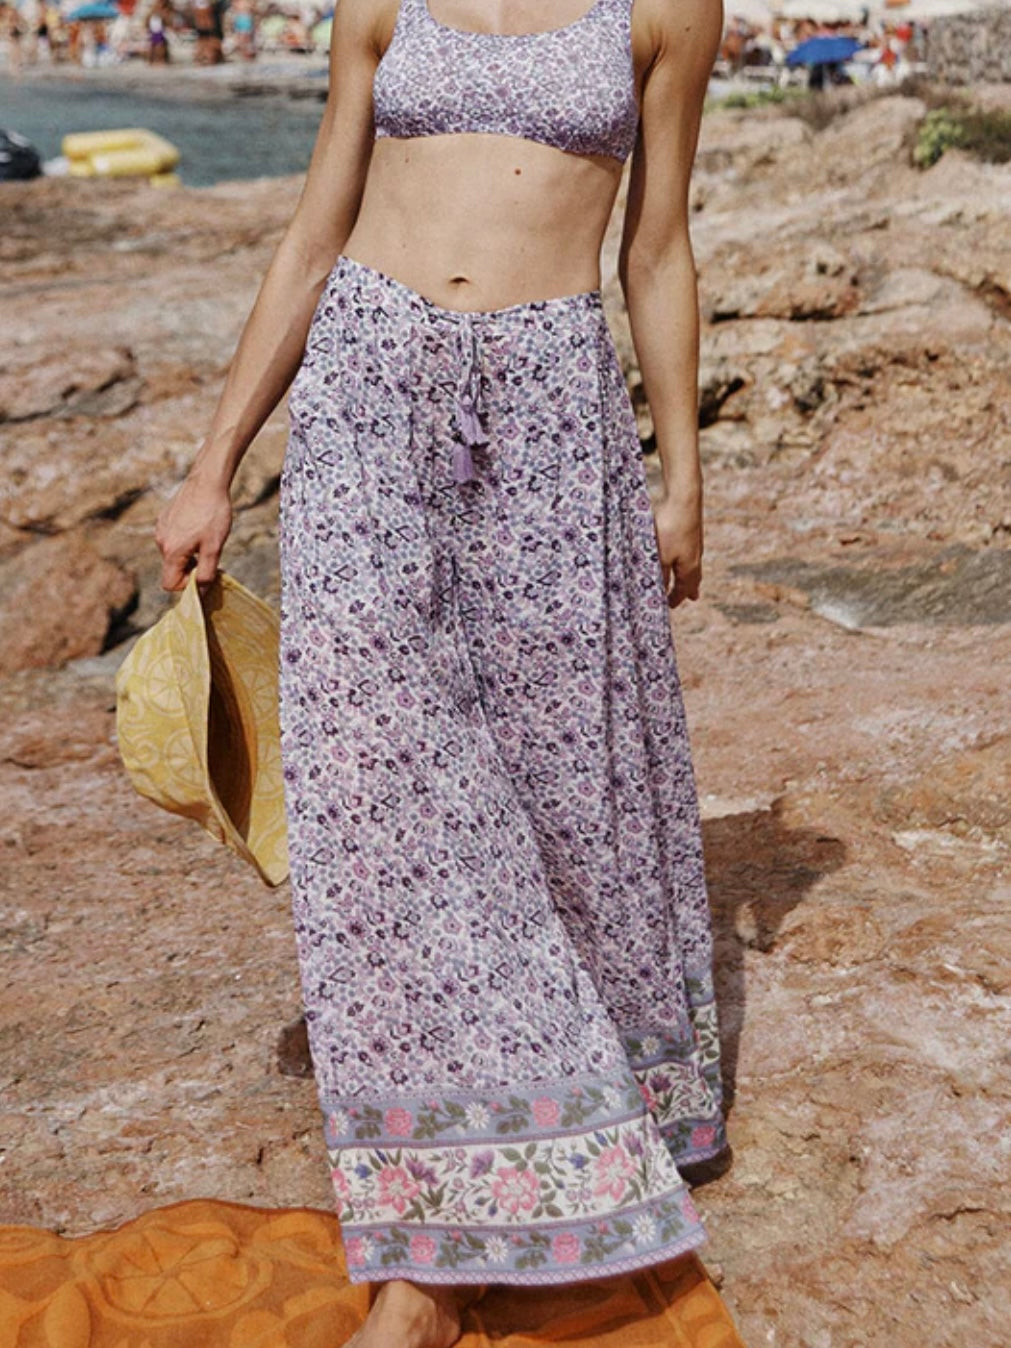 SPELL Sienna Pant in Lilac  my pop